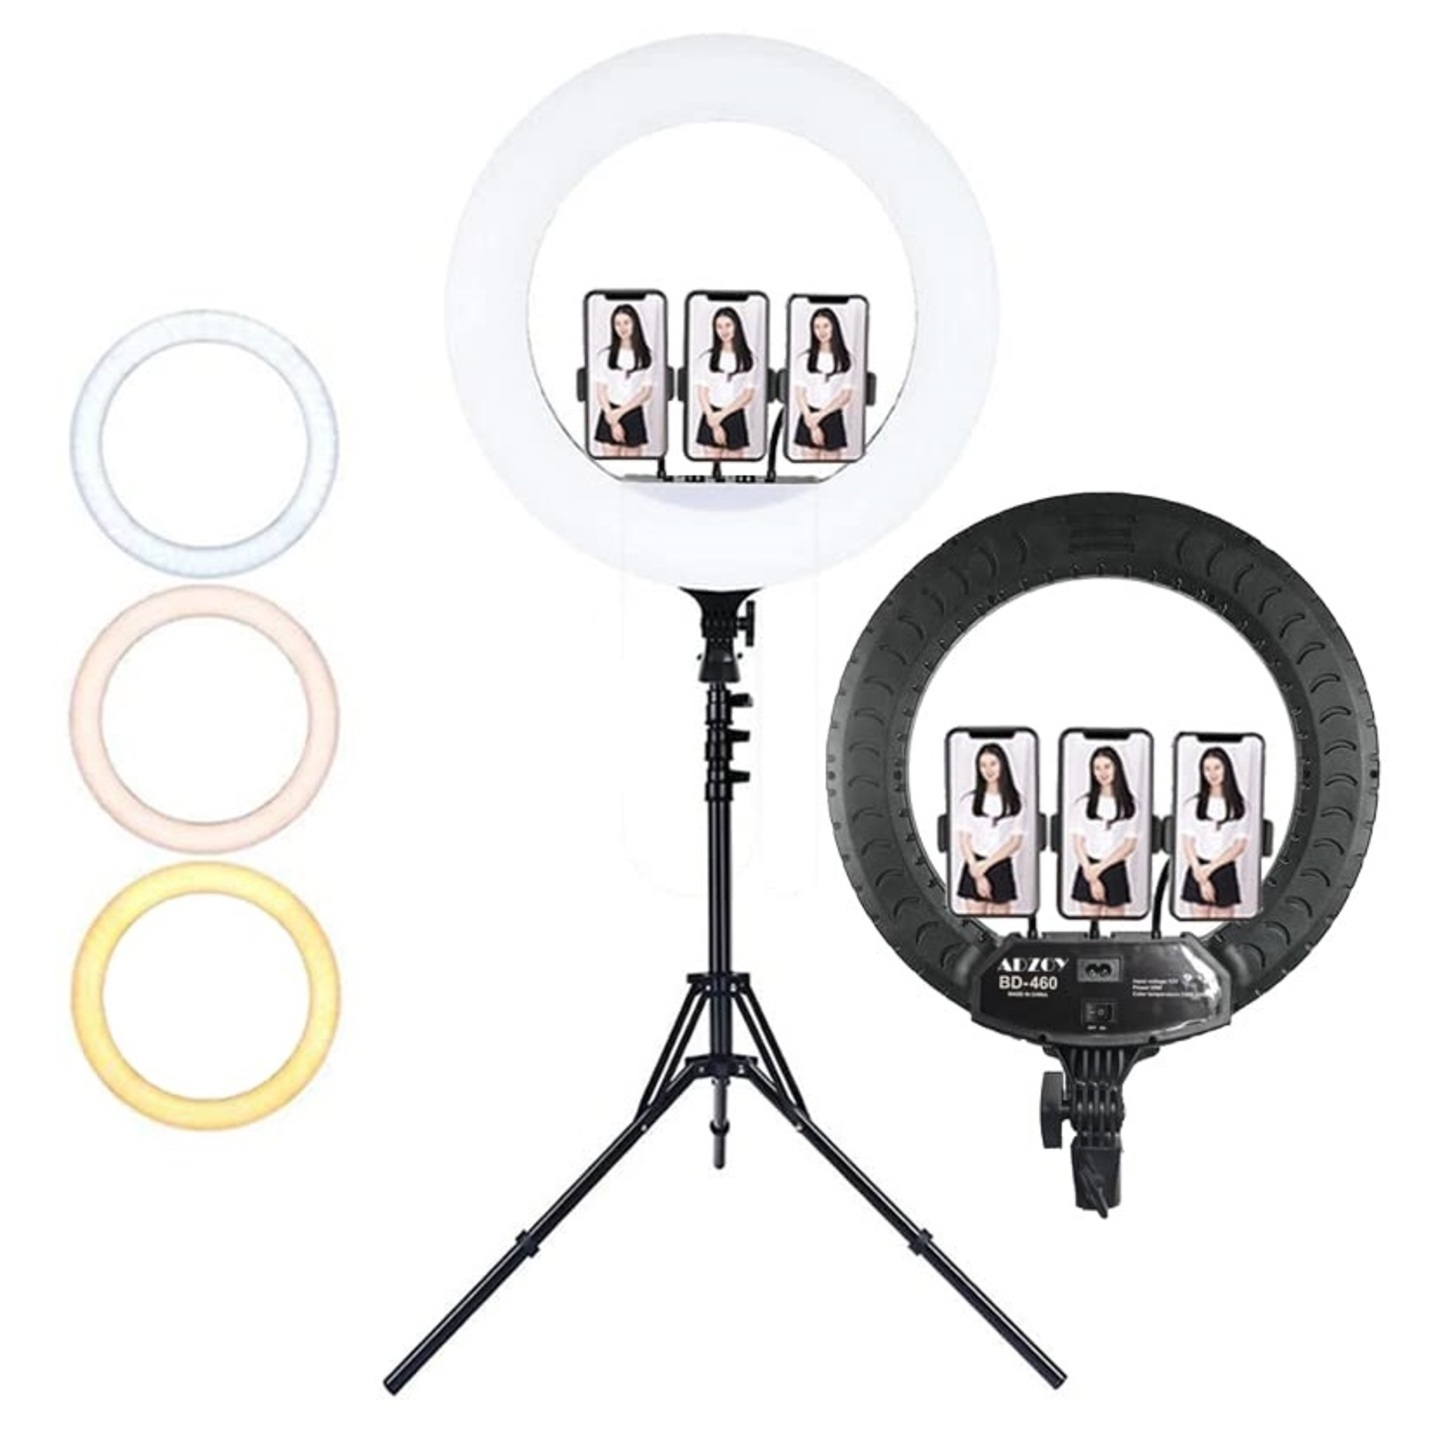 YD460-C 18 Inch Professional Ring Light with 600 LED Power stand not included